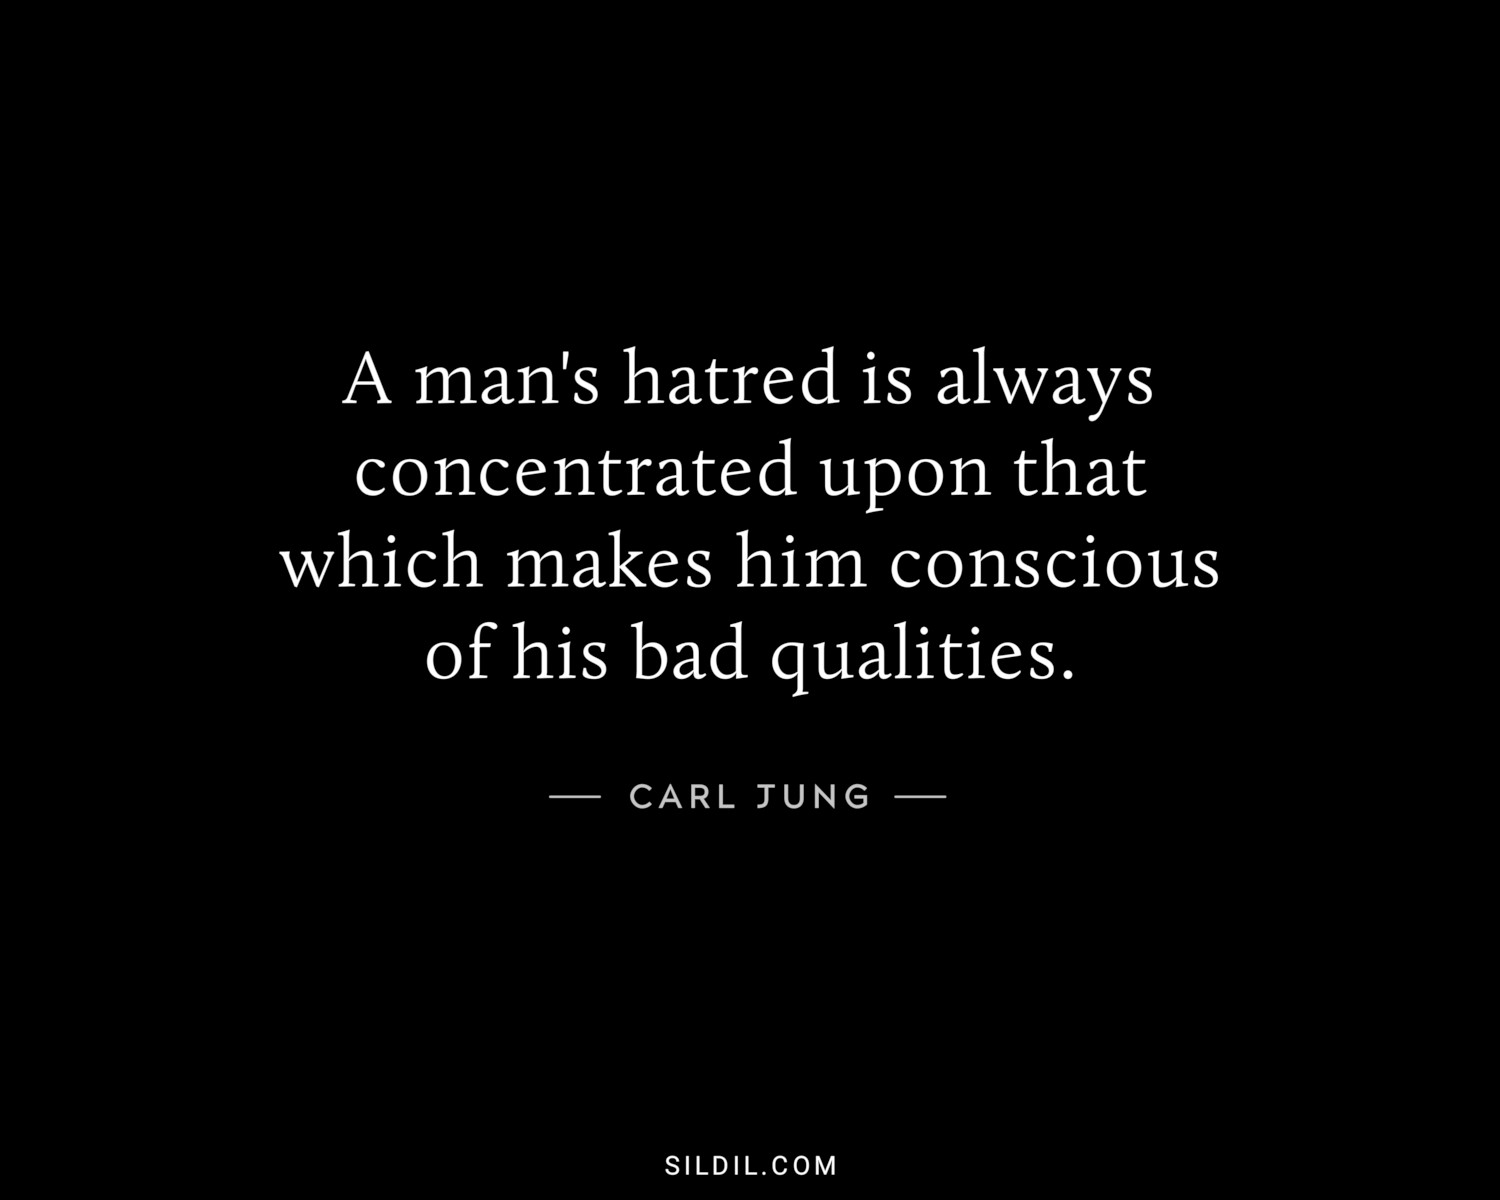 A man's hatred is always concentrated upon that which makes him conscious of his bad qualities.